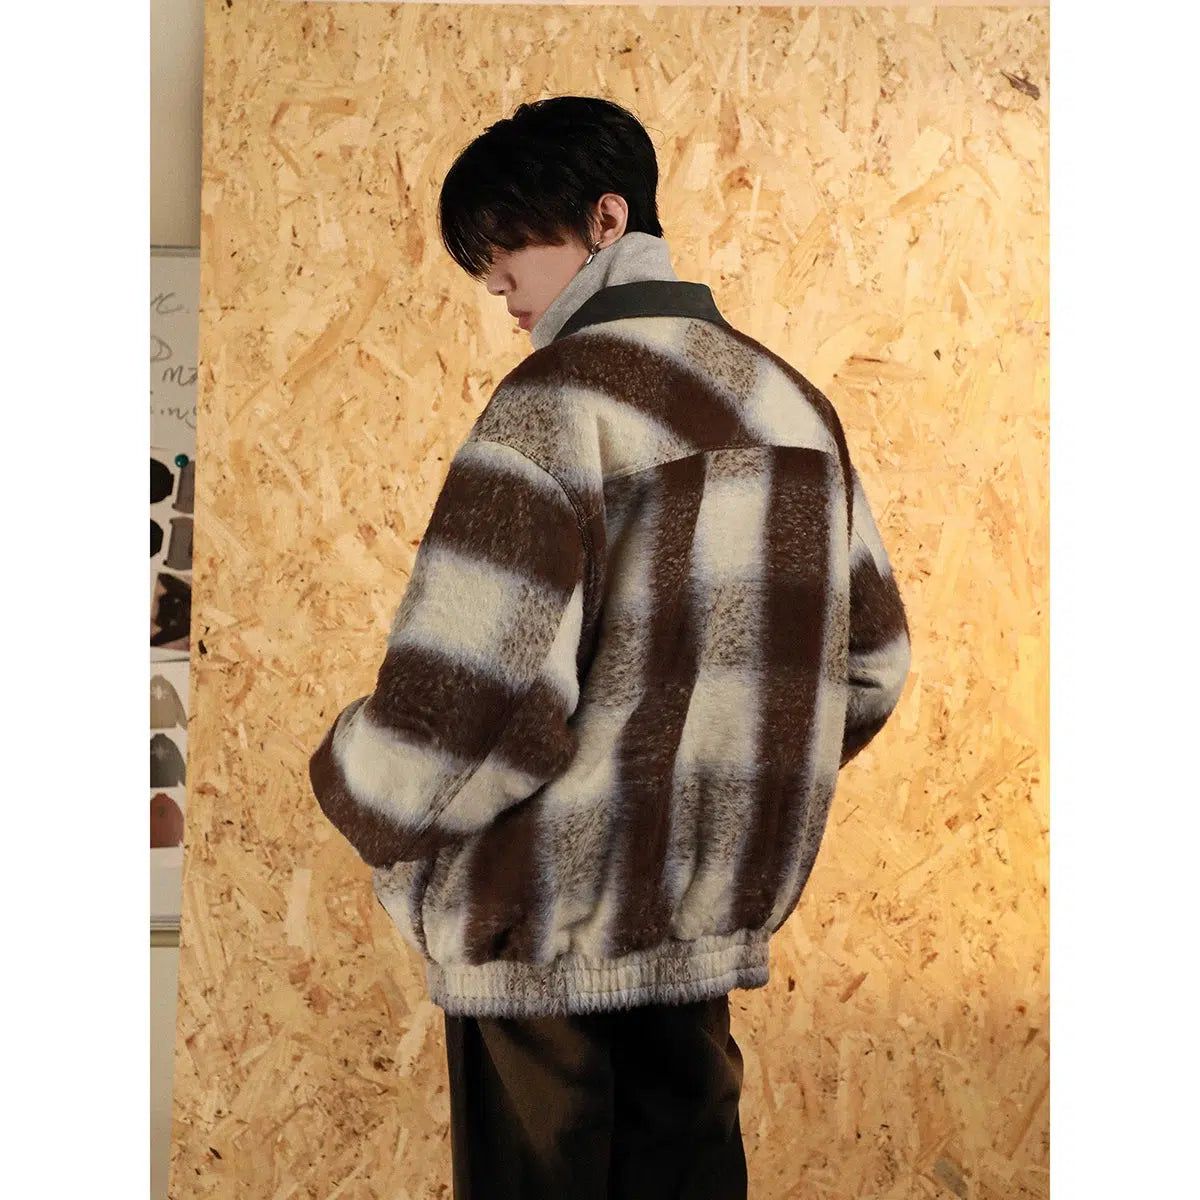 Collared Plaid Fur Jacket Korean Street Fashion Jacket By Mr Nearly Shop Online at OH Vault